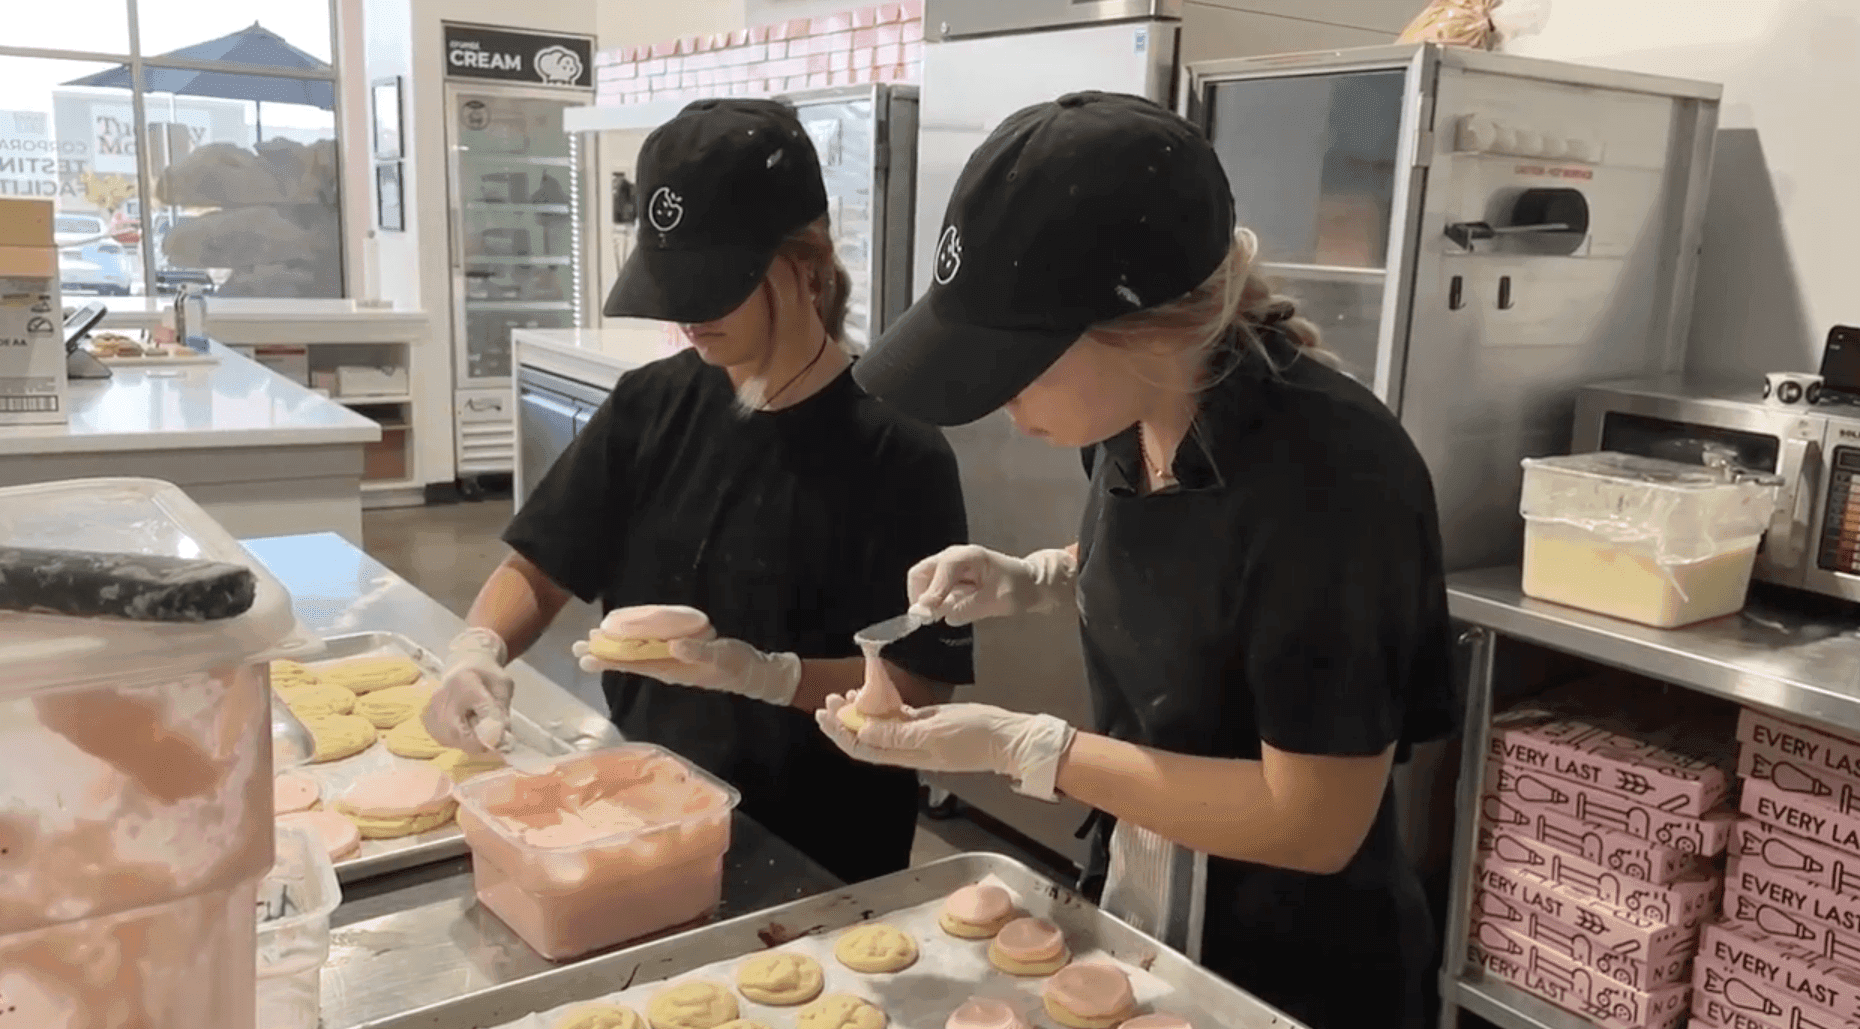 Two female workers preparing food behind the counter at the store